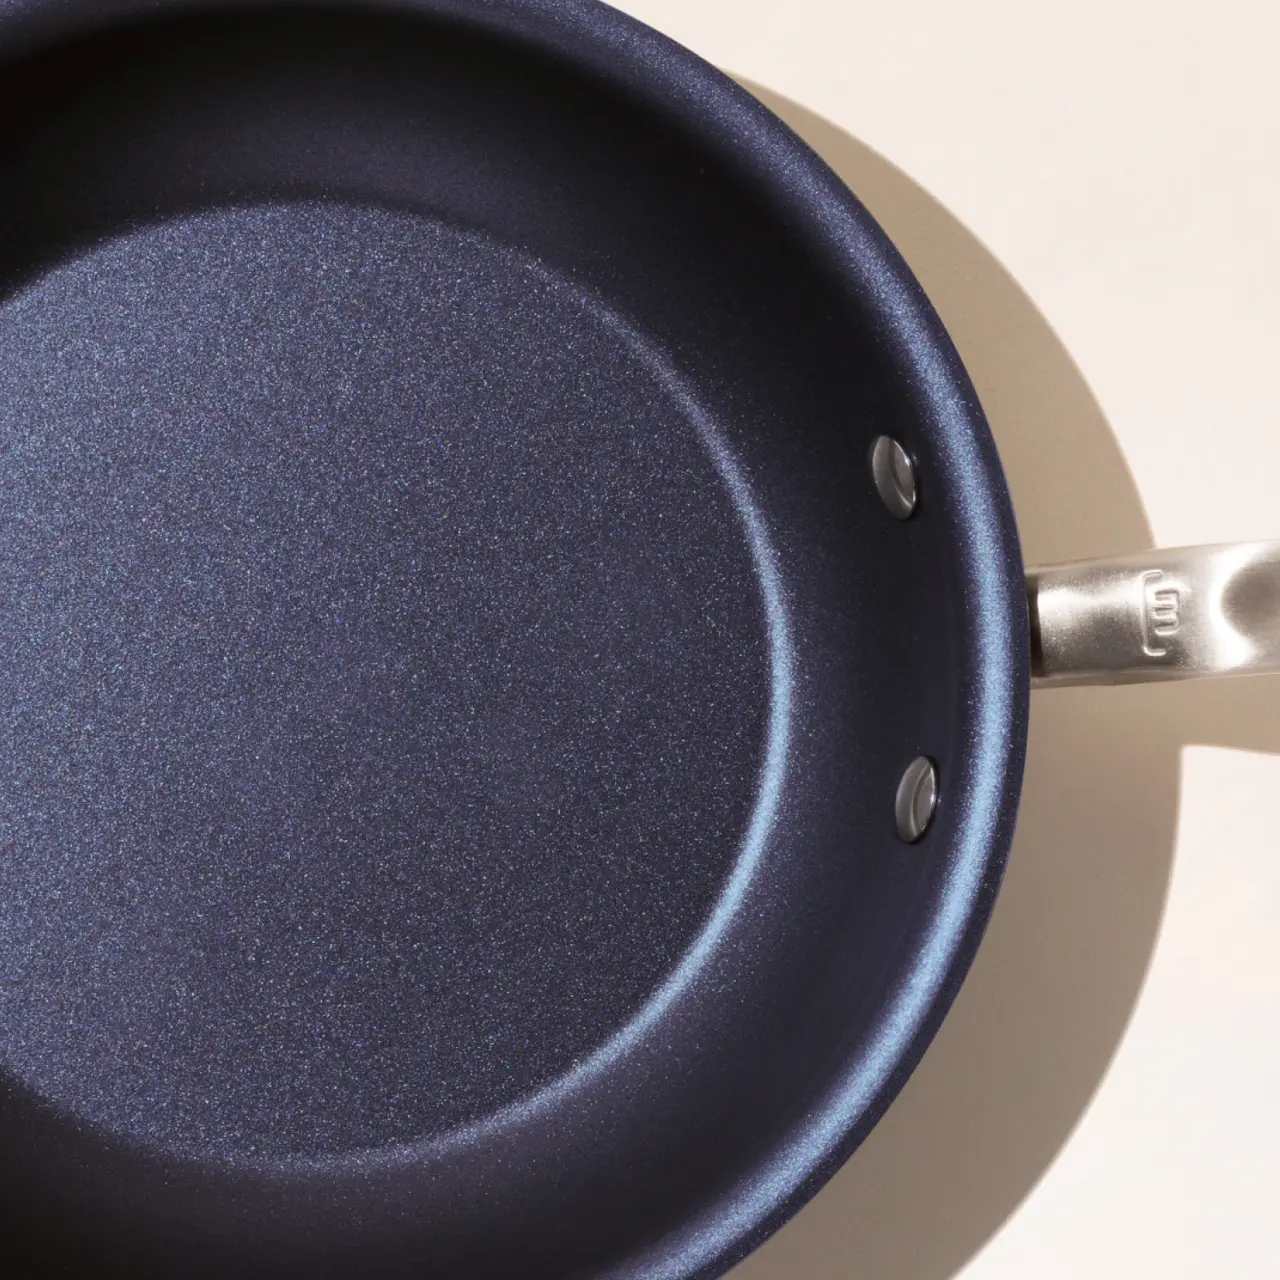 Stainless Steel Non Stick Frying Pans - Made In